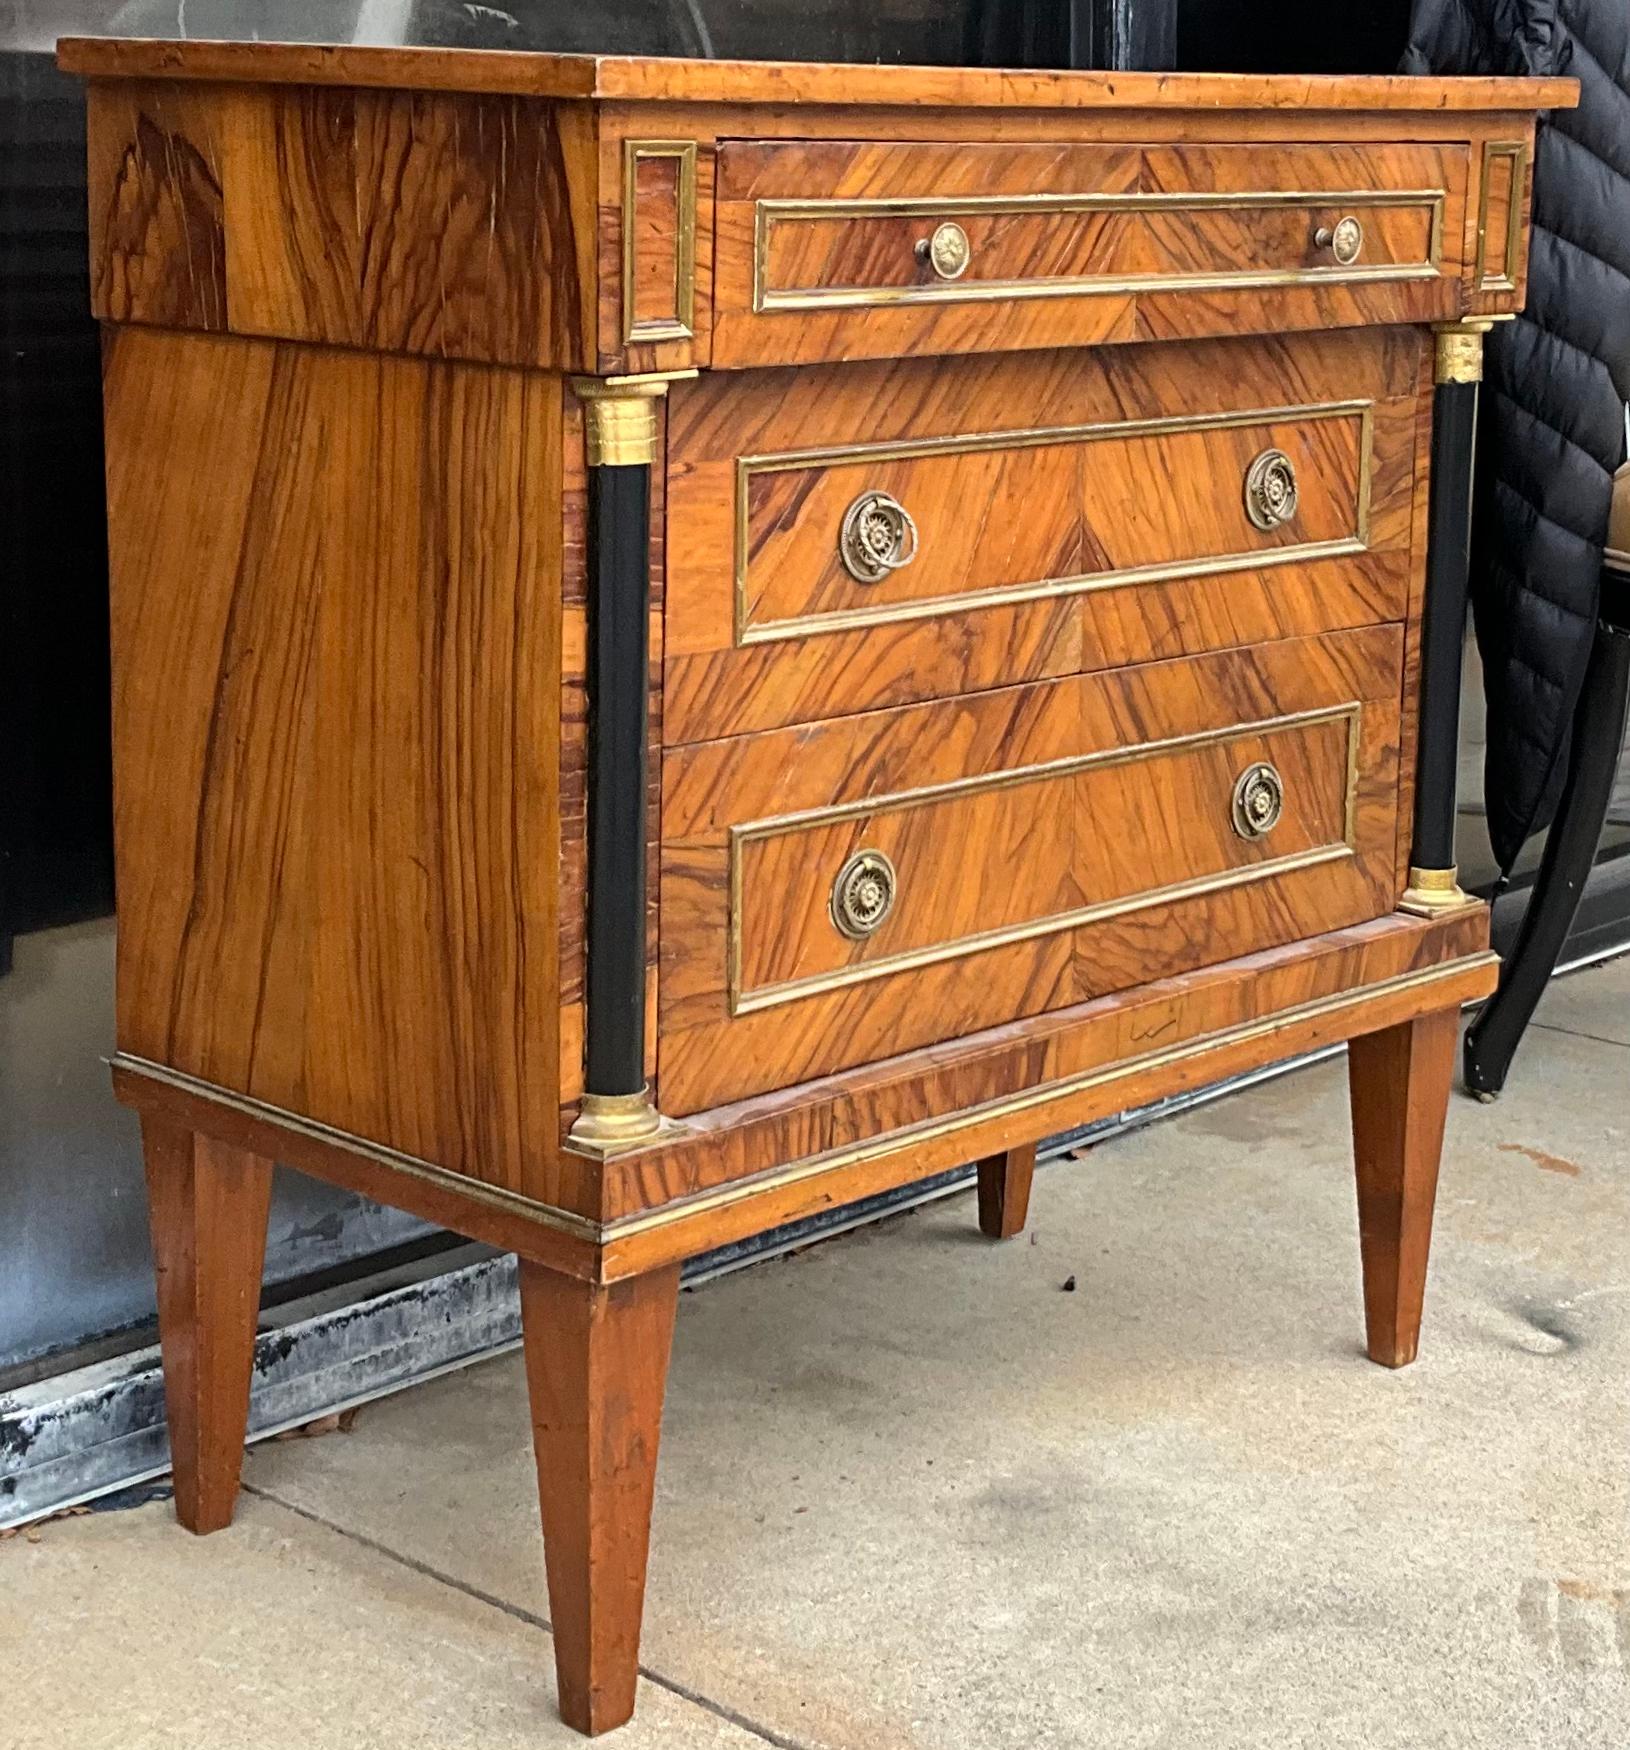 This is a 1950s Italian neo-classical style walnut chest. It has ebonized and gilt columns and the original brass hardware. The drawers are lined in paper, and the label is on the back. Such a handsome piece!